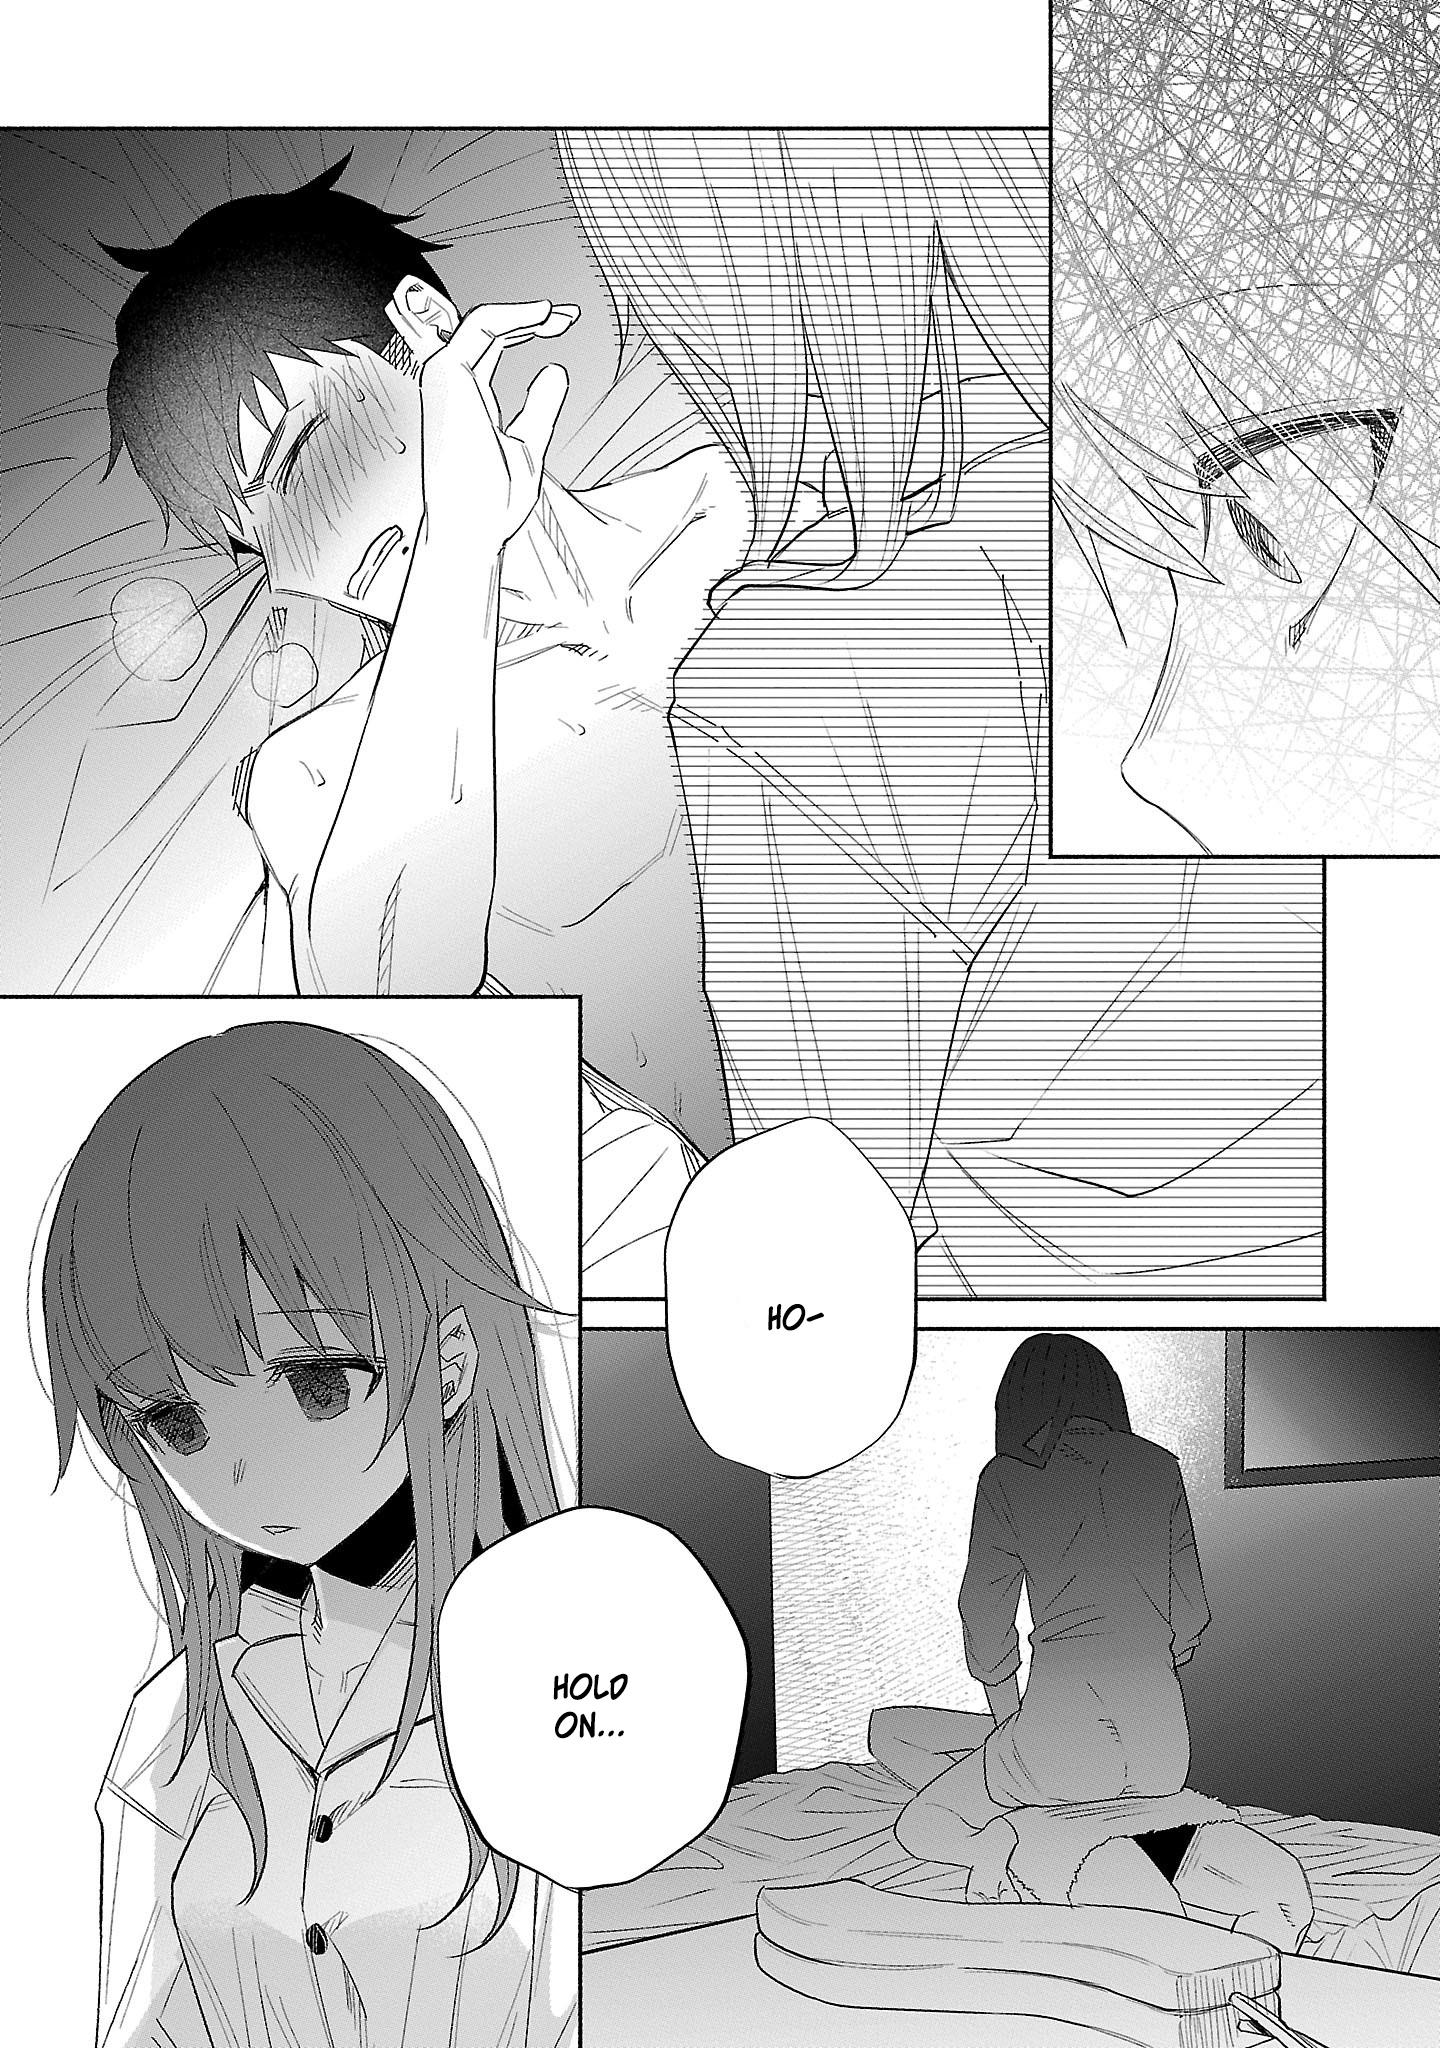 I Wanted To Be Hurt By Love - Page 3